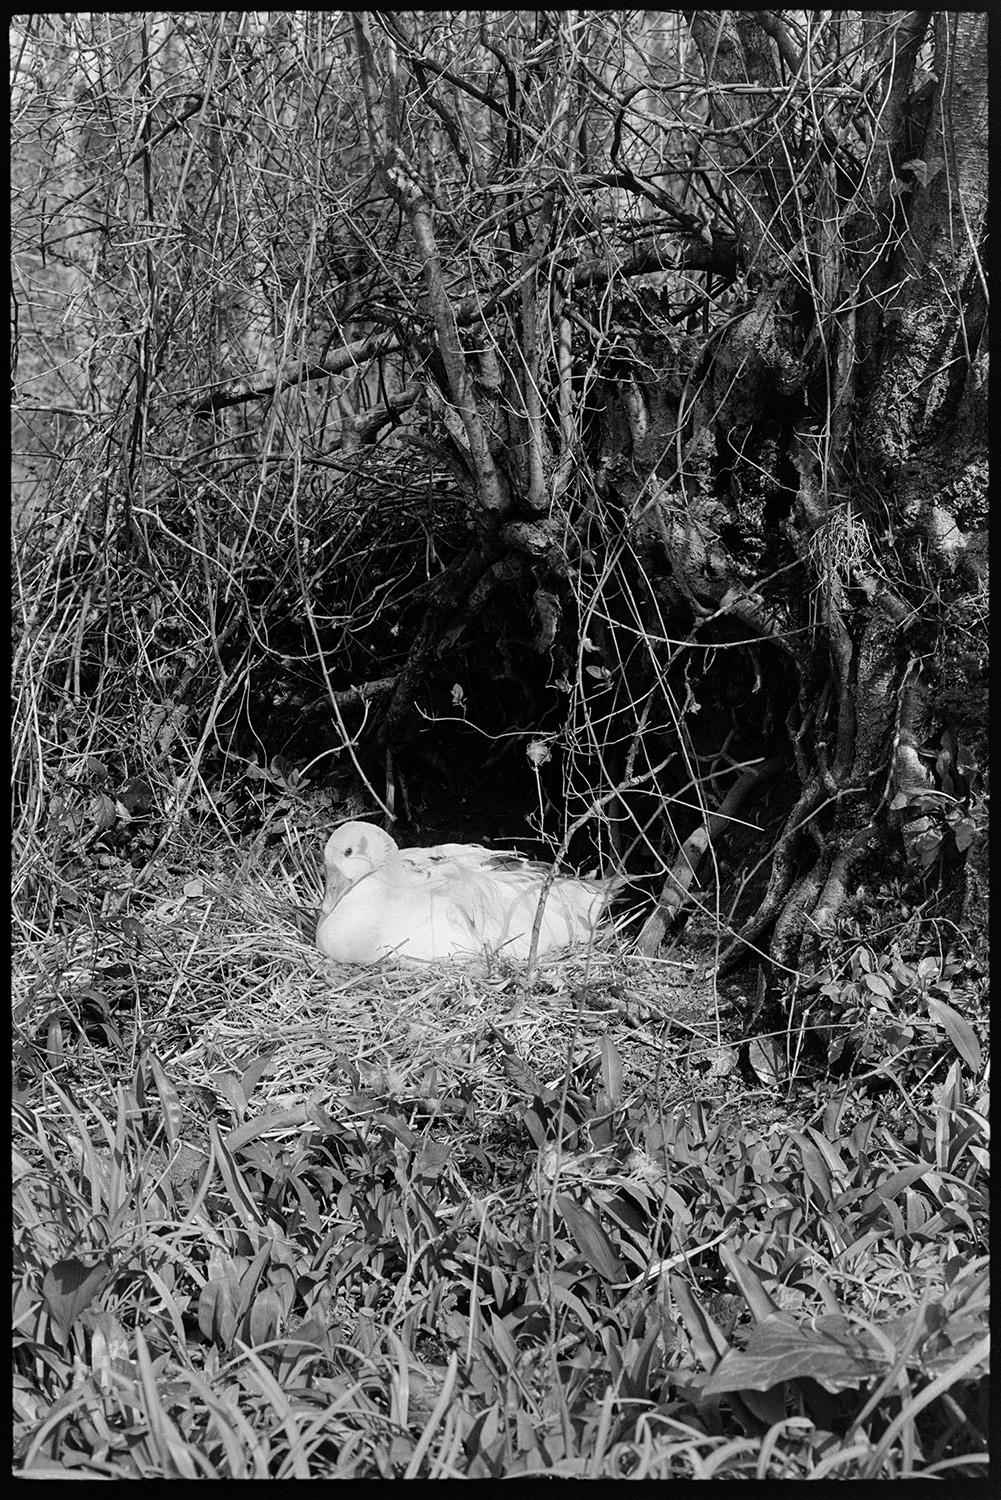 Goose sitting on nest. 
[A goose sitting on a nest by a tree and undergrowth at Millhams, Dolton.]